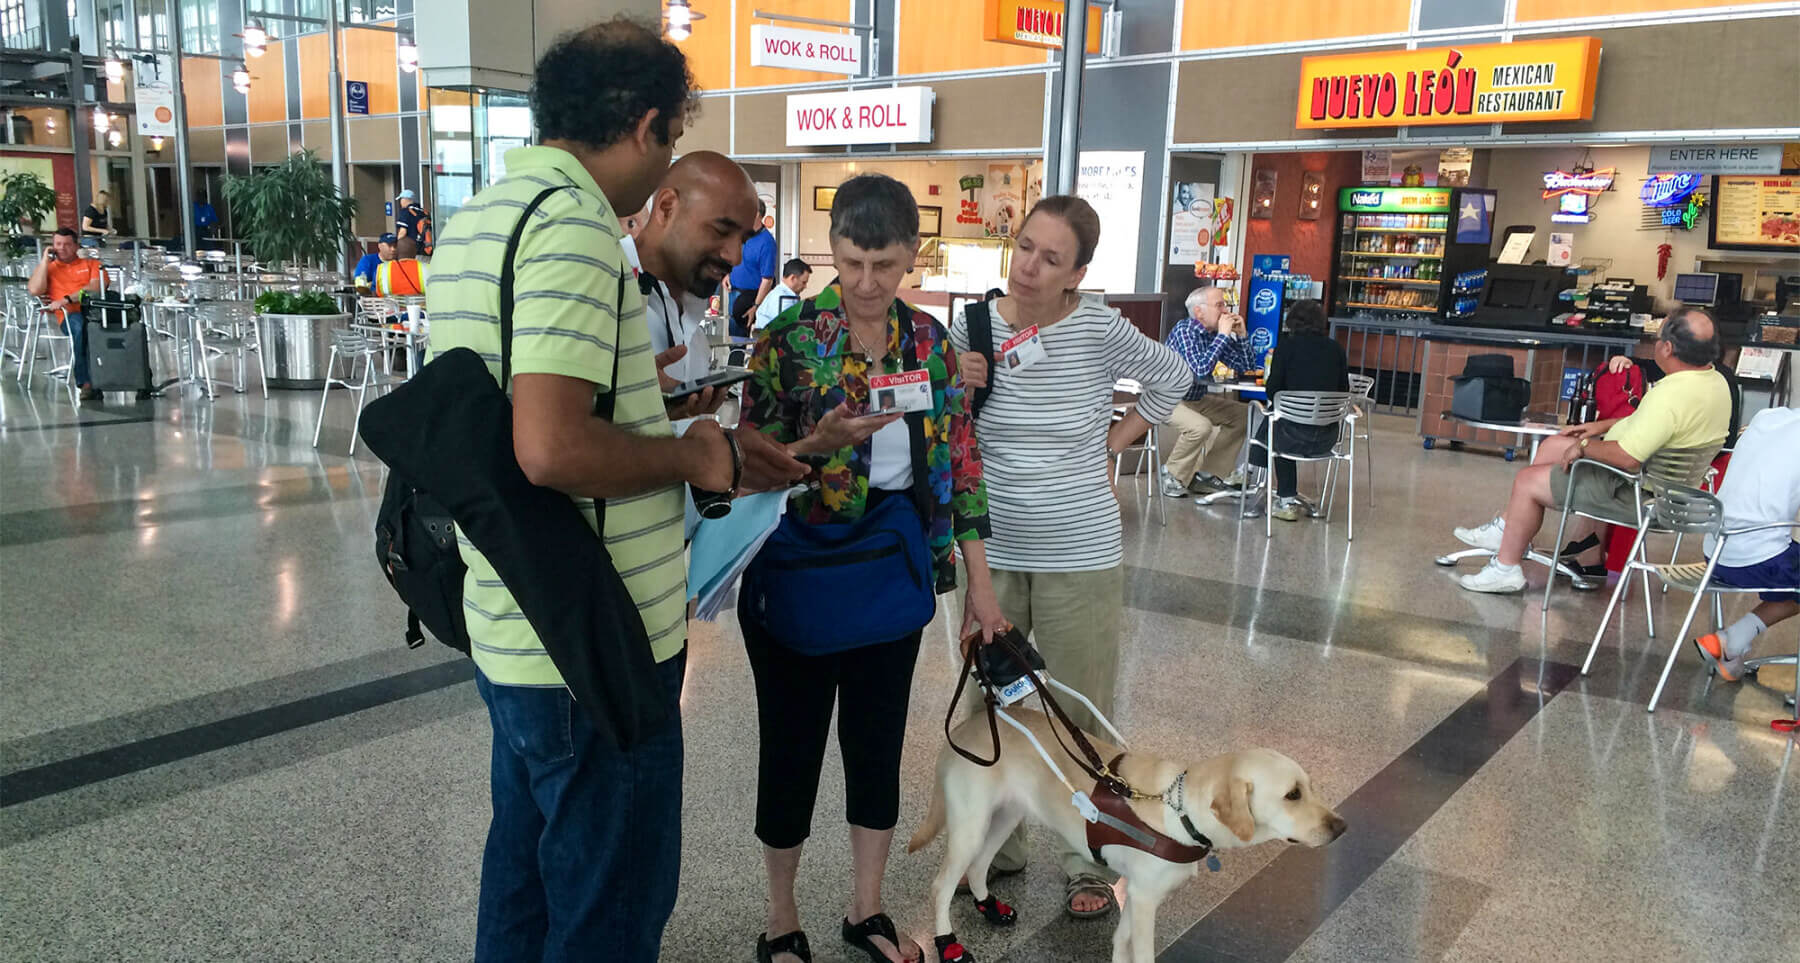 aging travelers and persons with disabilities using an app on their phones to navigate airport